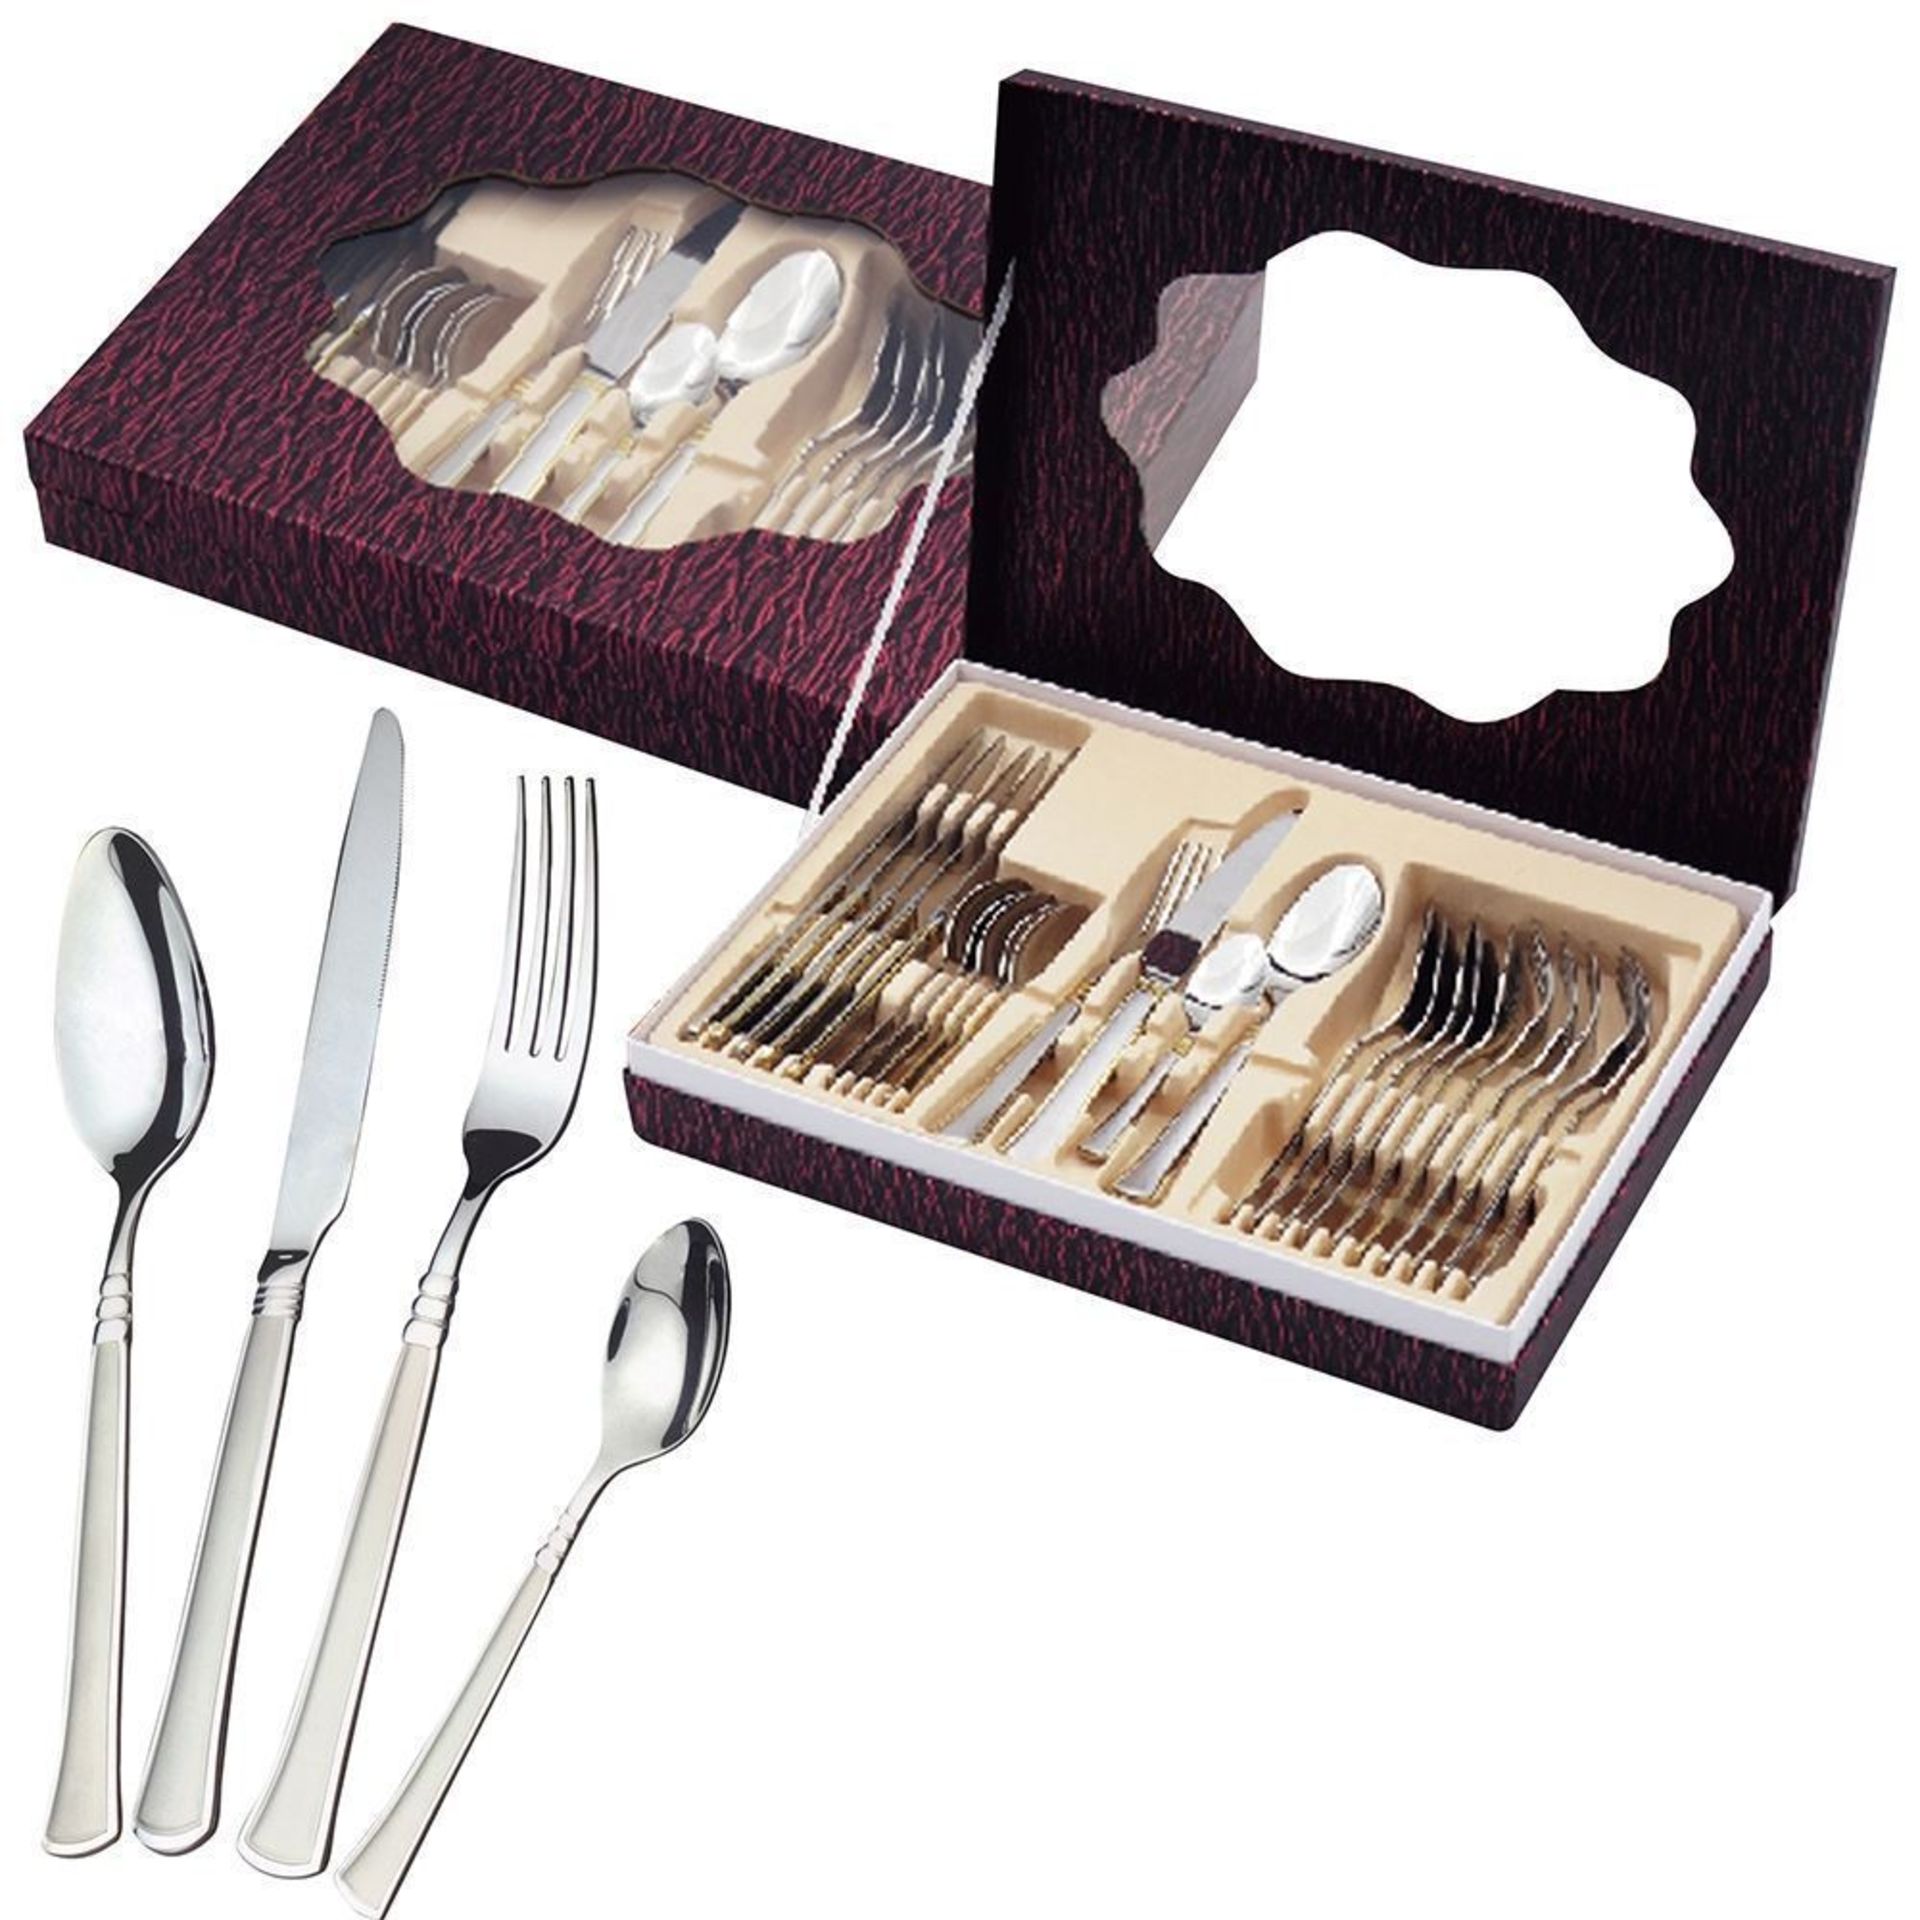 V Brand New Waltman and Sons 24 Piece Polished and Stainless Steel Cutlery set (Pattern is different